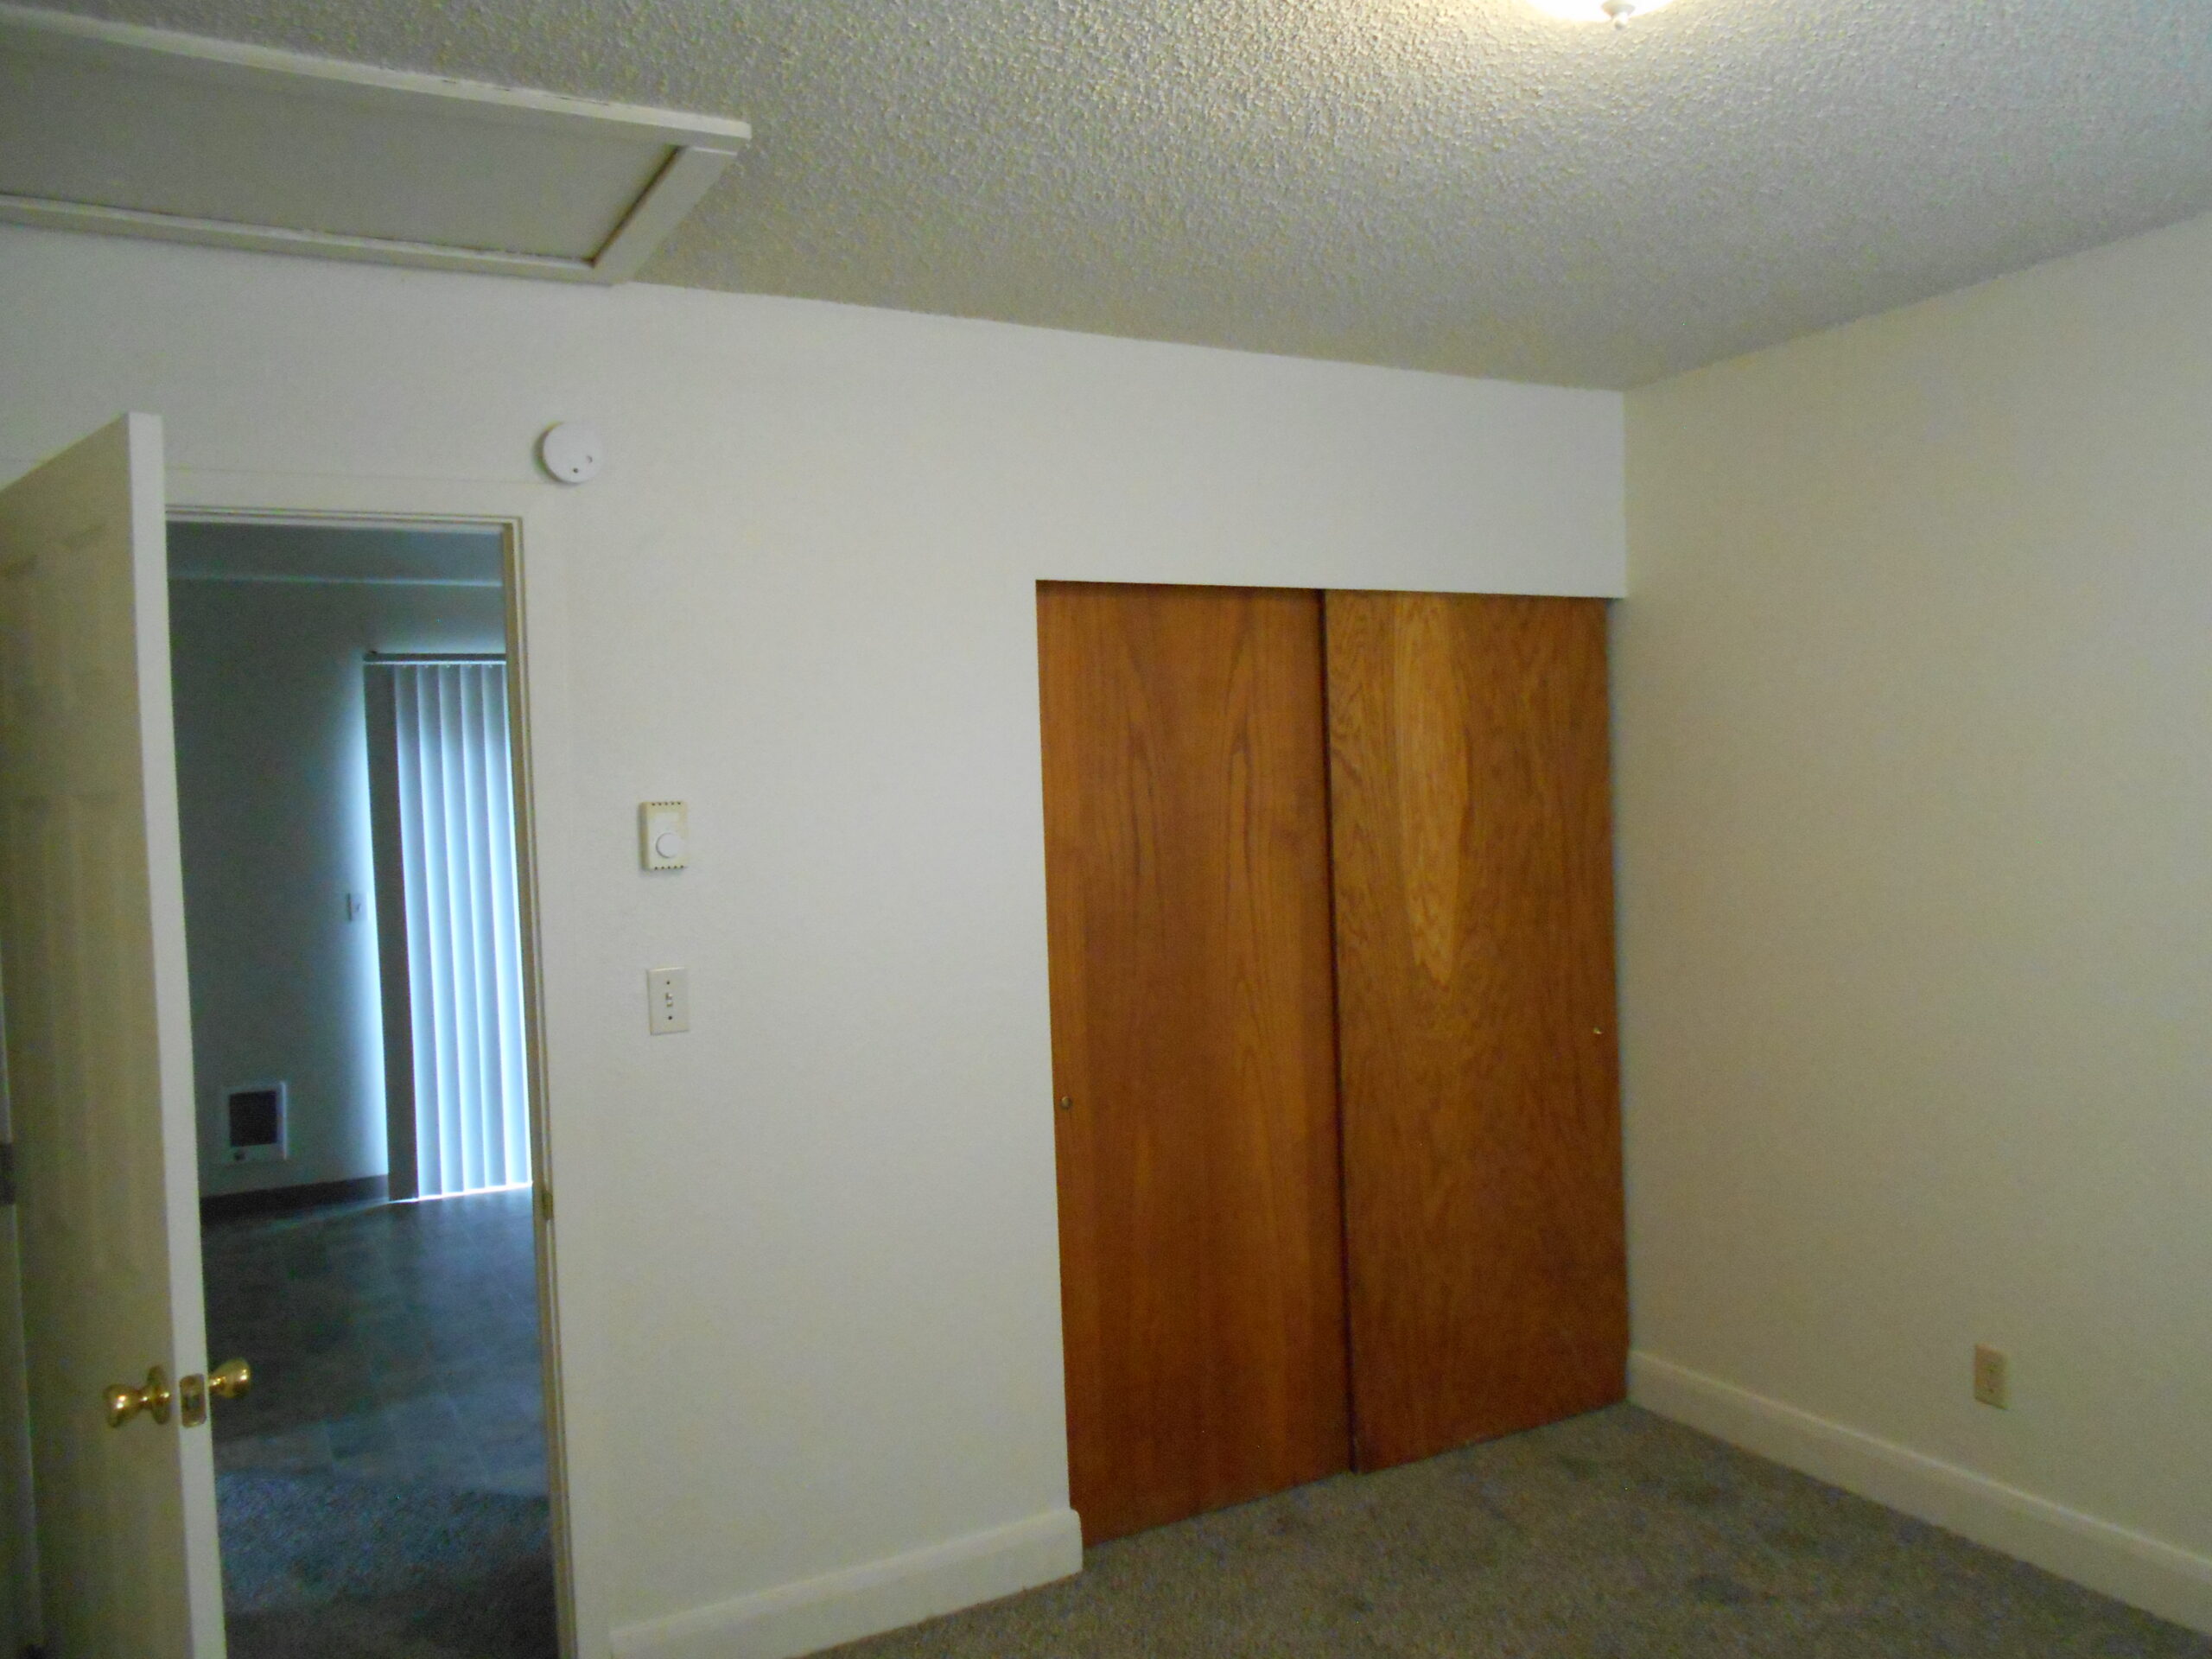 $1,100 – 1 Bedroom Duplex in Tacoma with FREE* APPLICATION FEES!!!